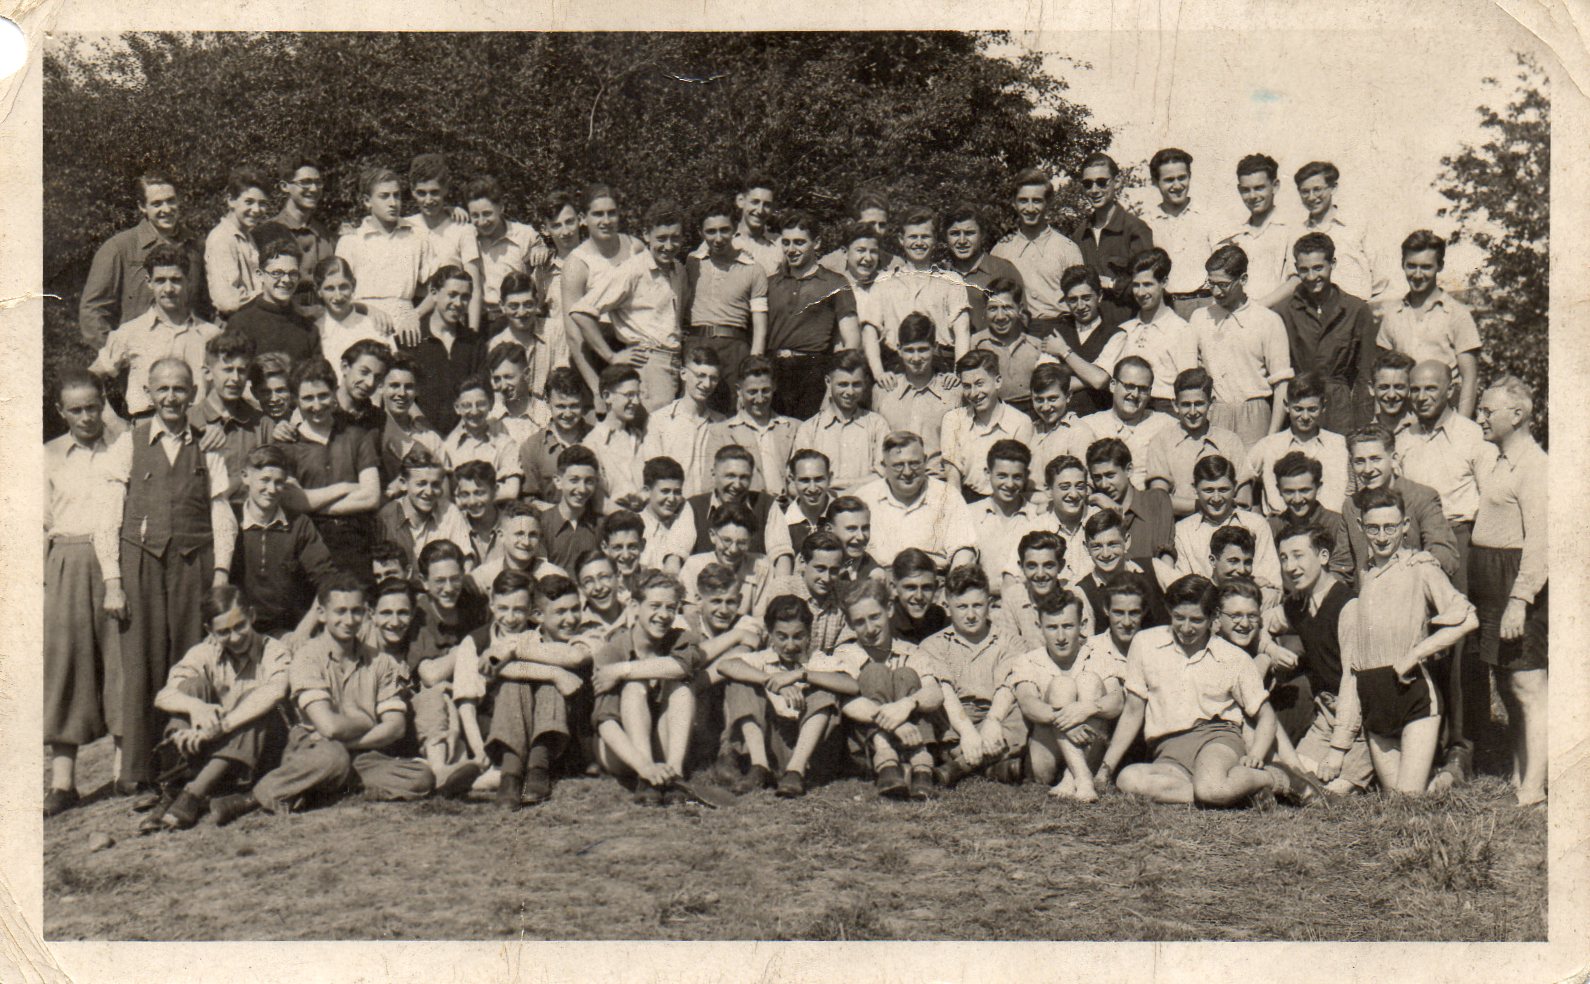 In Kitchener camp: boys and staff of the Berlin ORT, 1939